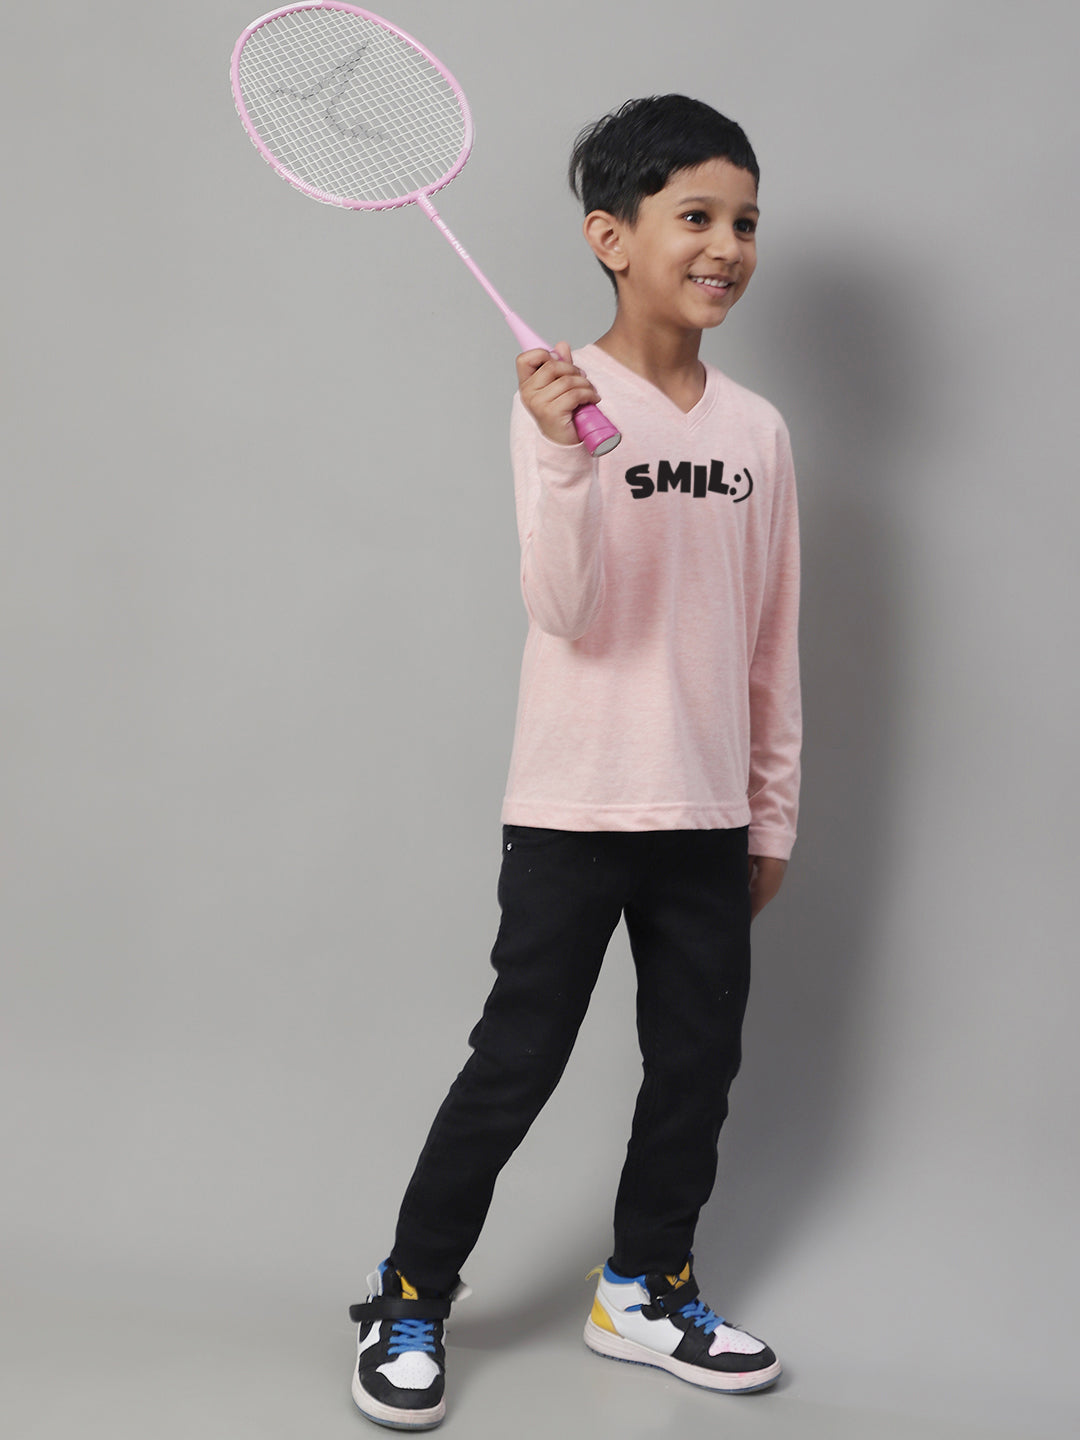 Boys Smile Casual Fit Printed T-Shirt - Friskers